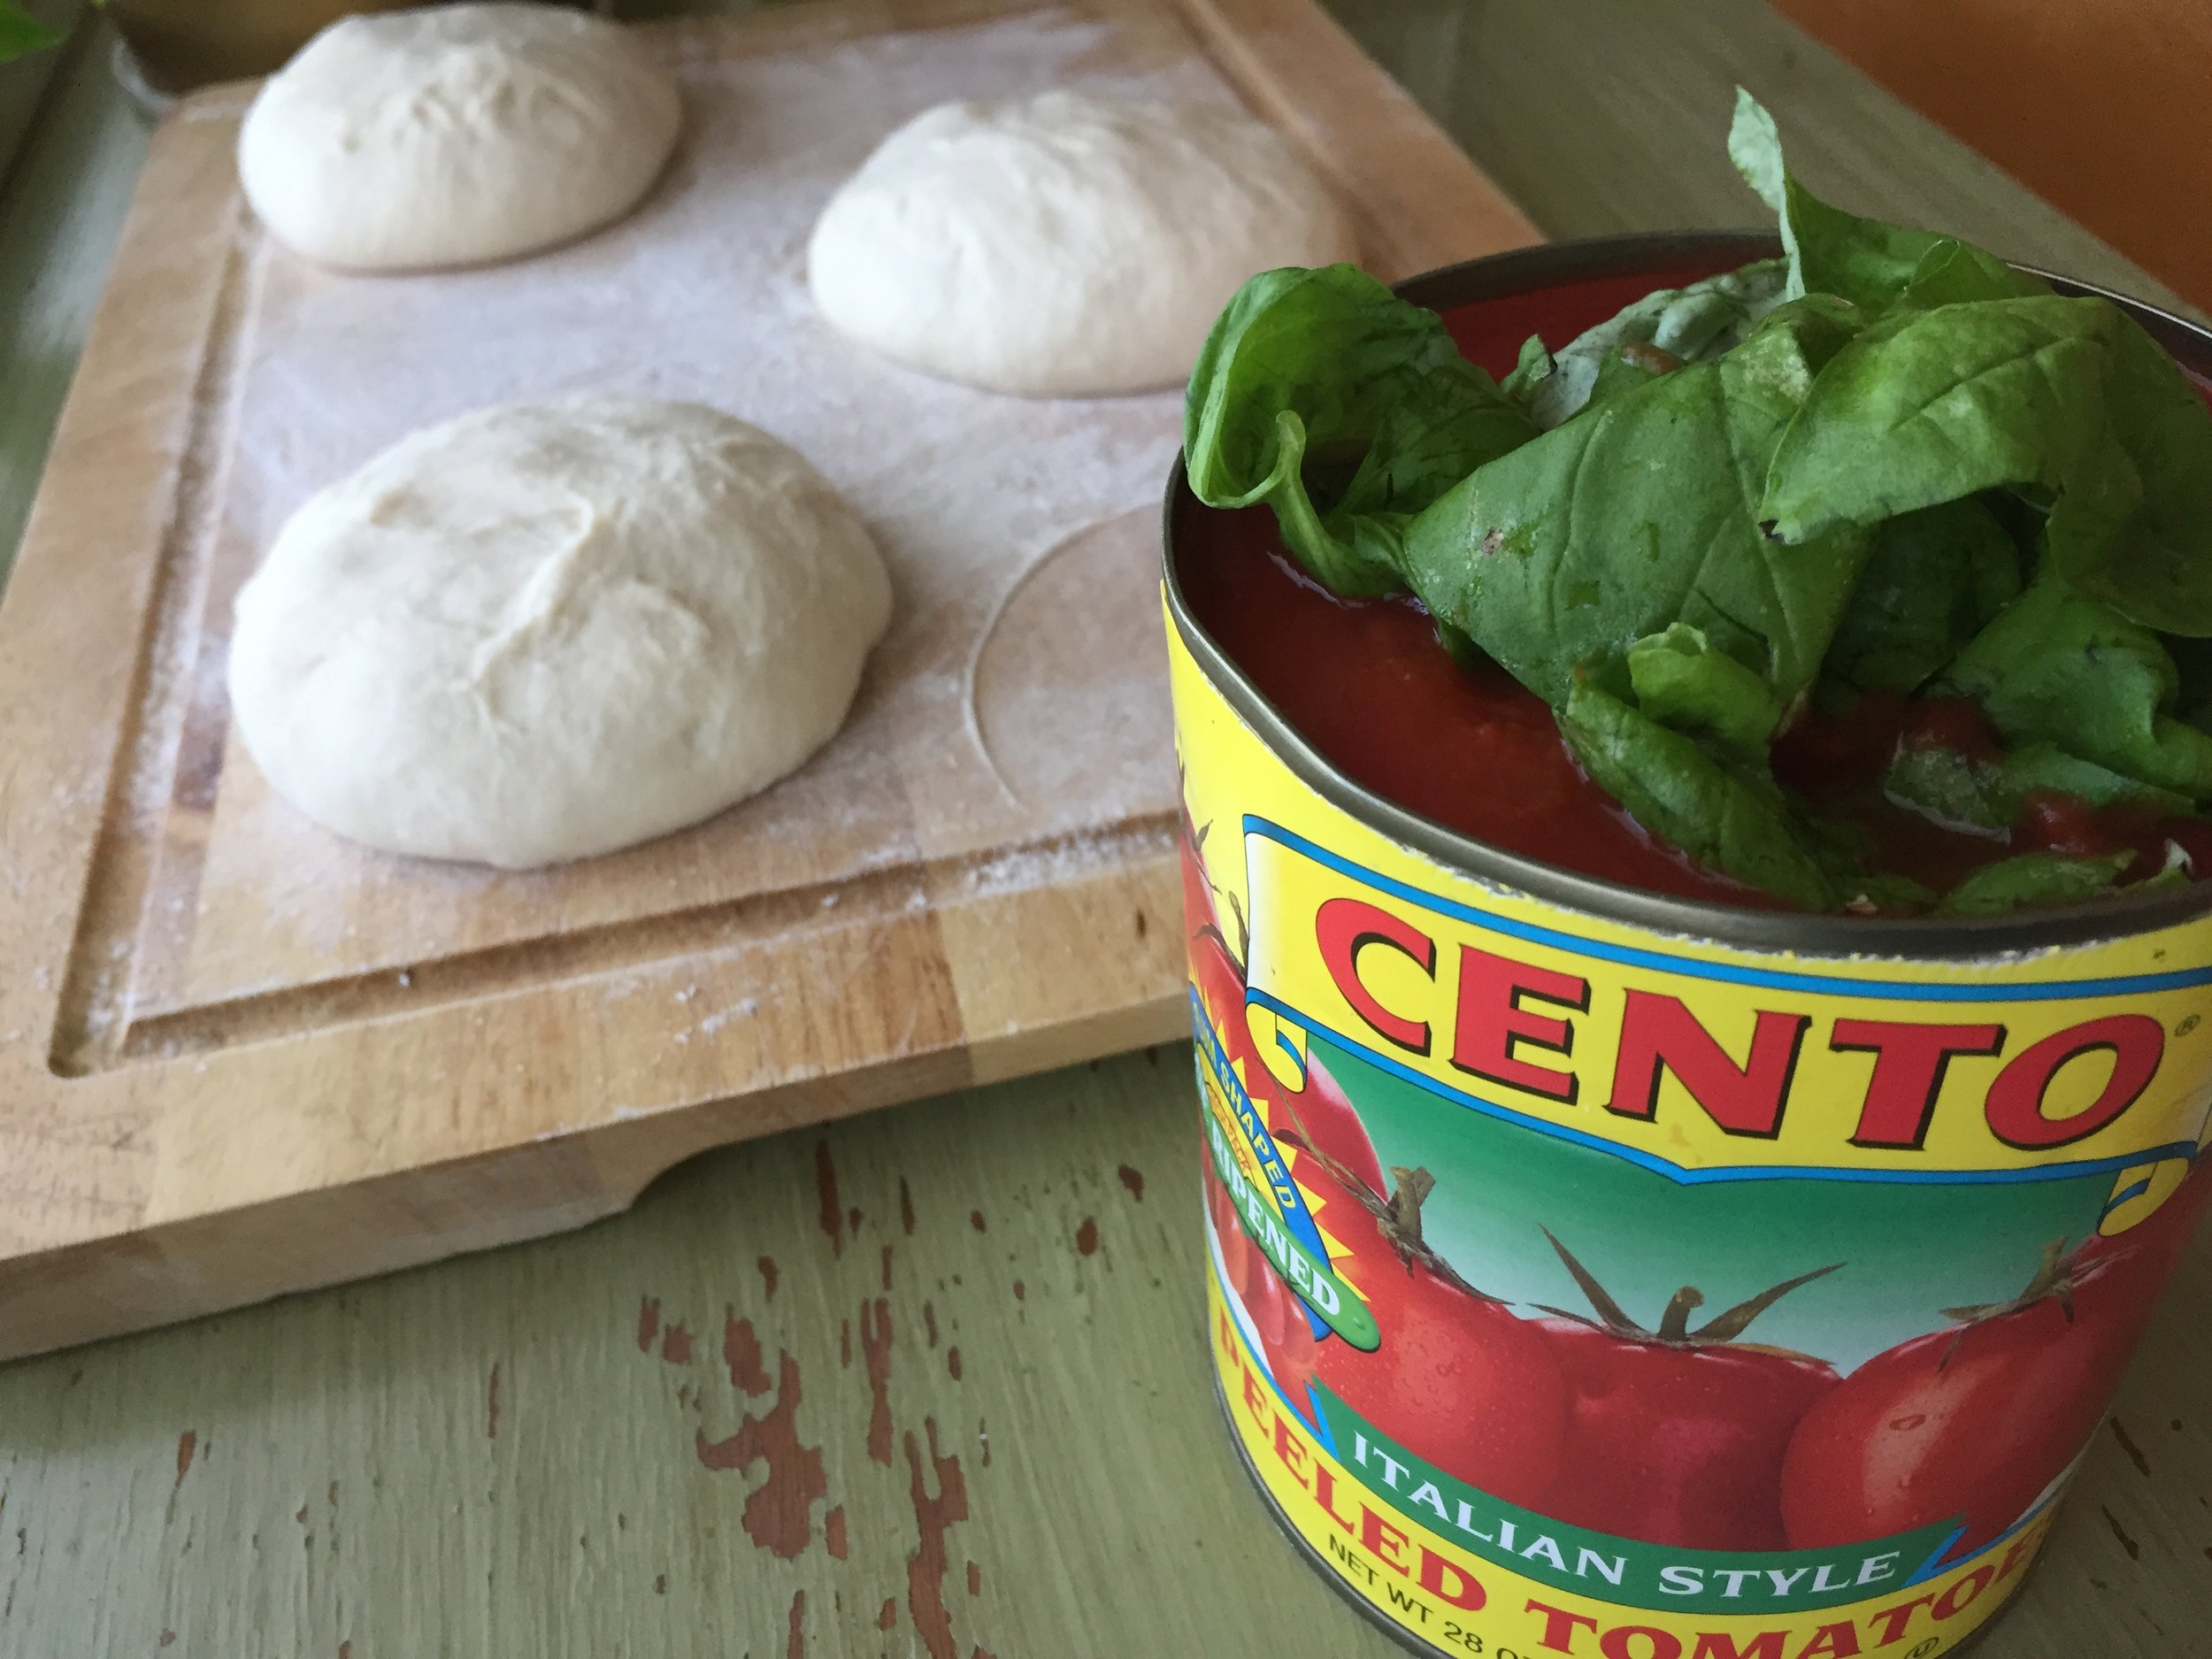  While the dough is resting, prepare your sauce and toppings.  